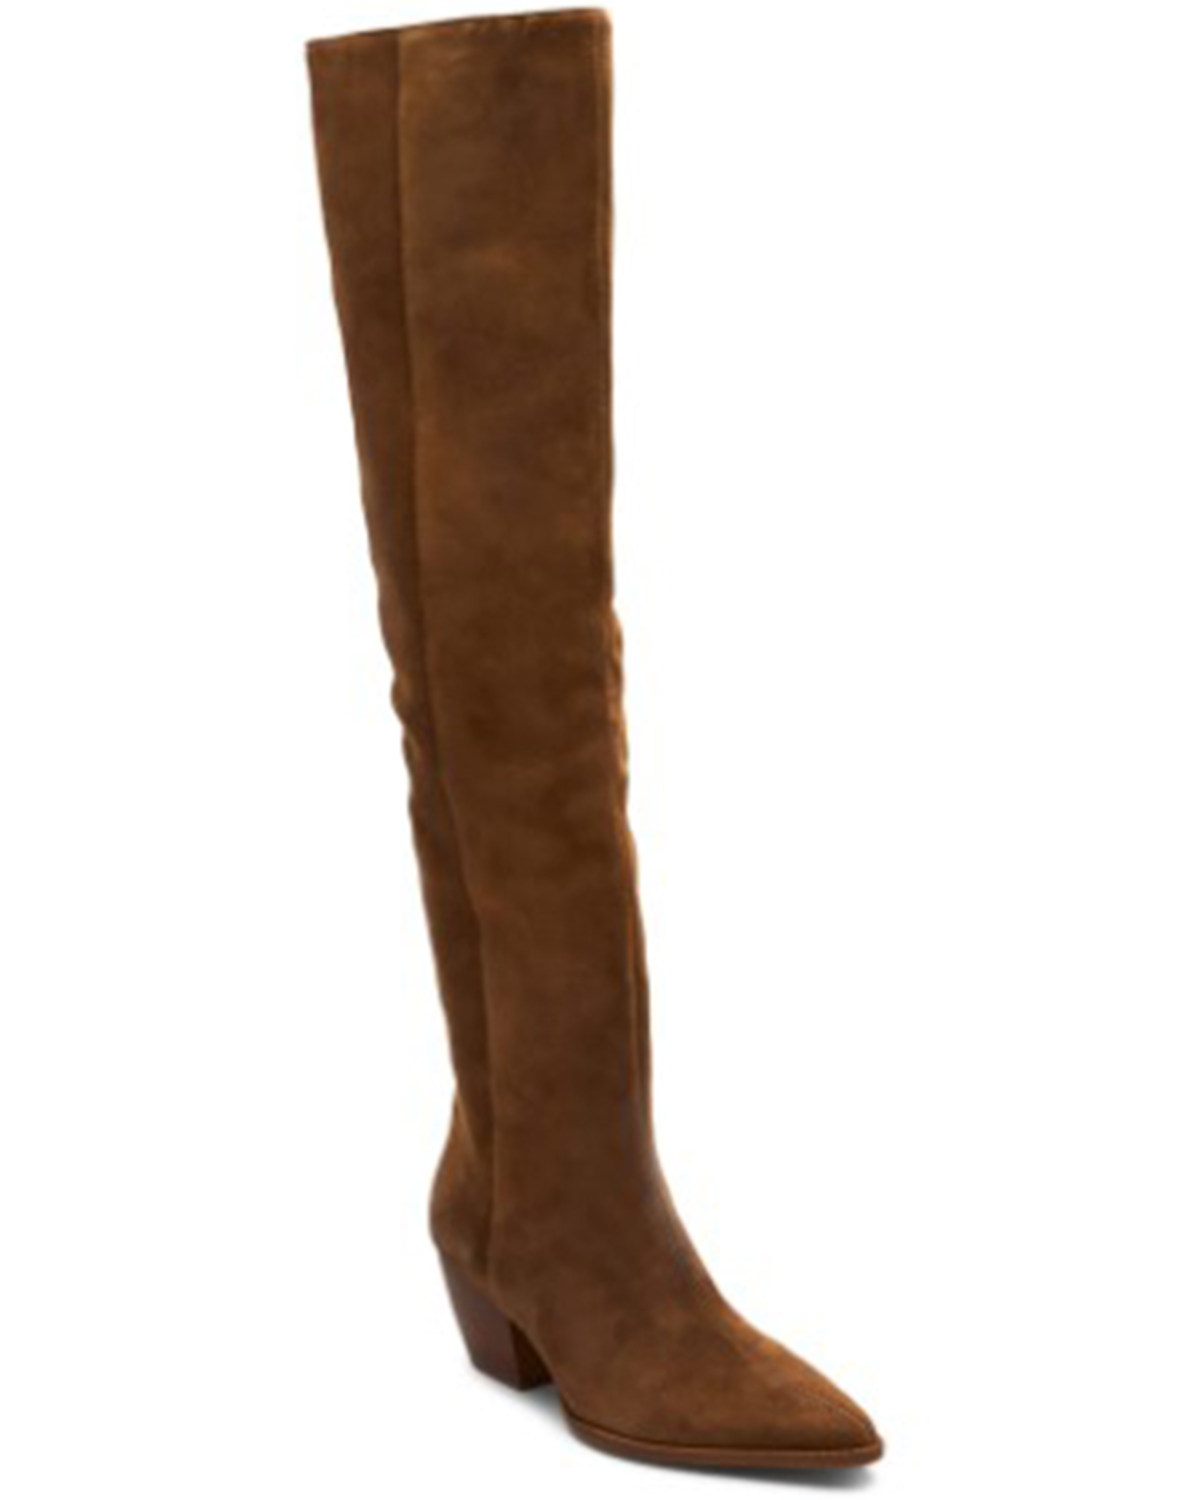 Matisse Women's Sky High Western Boots - Pointed Toe